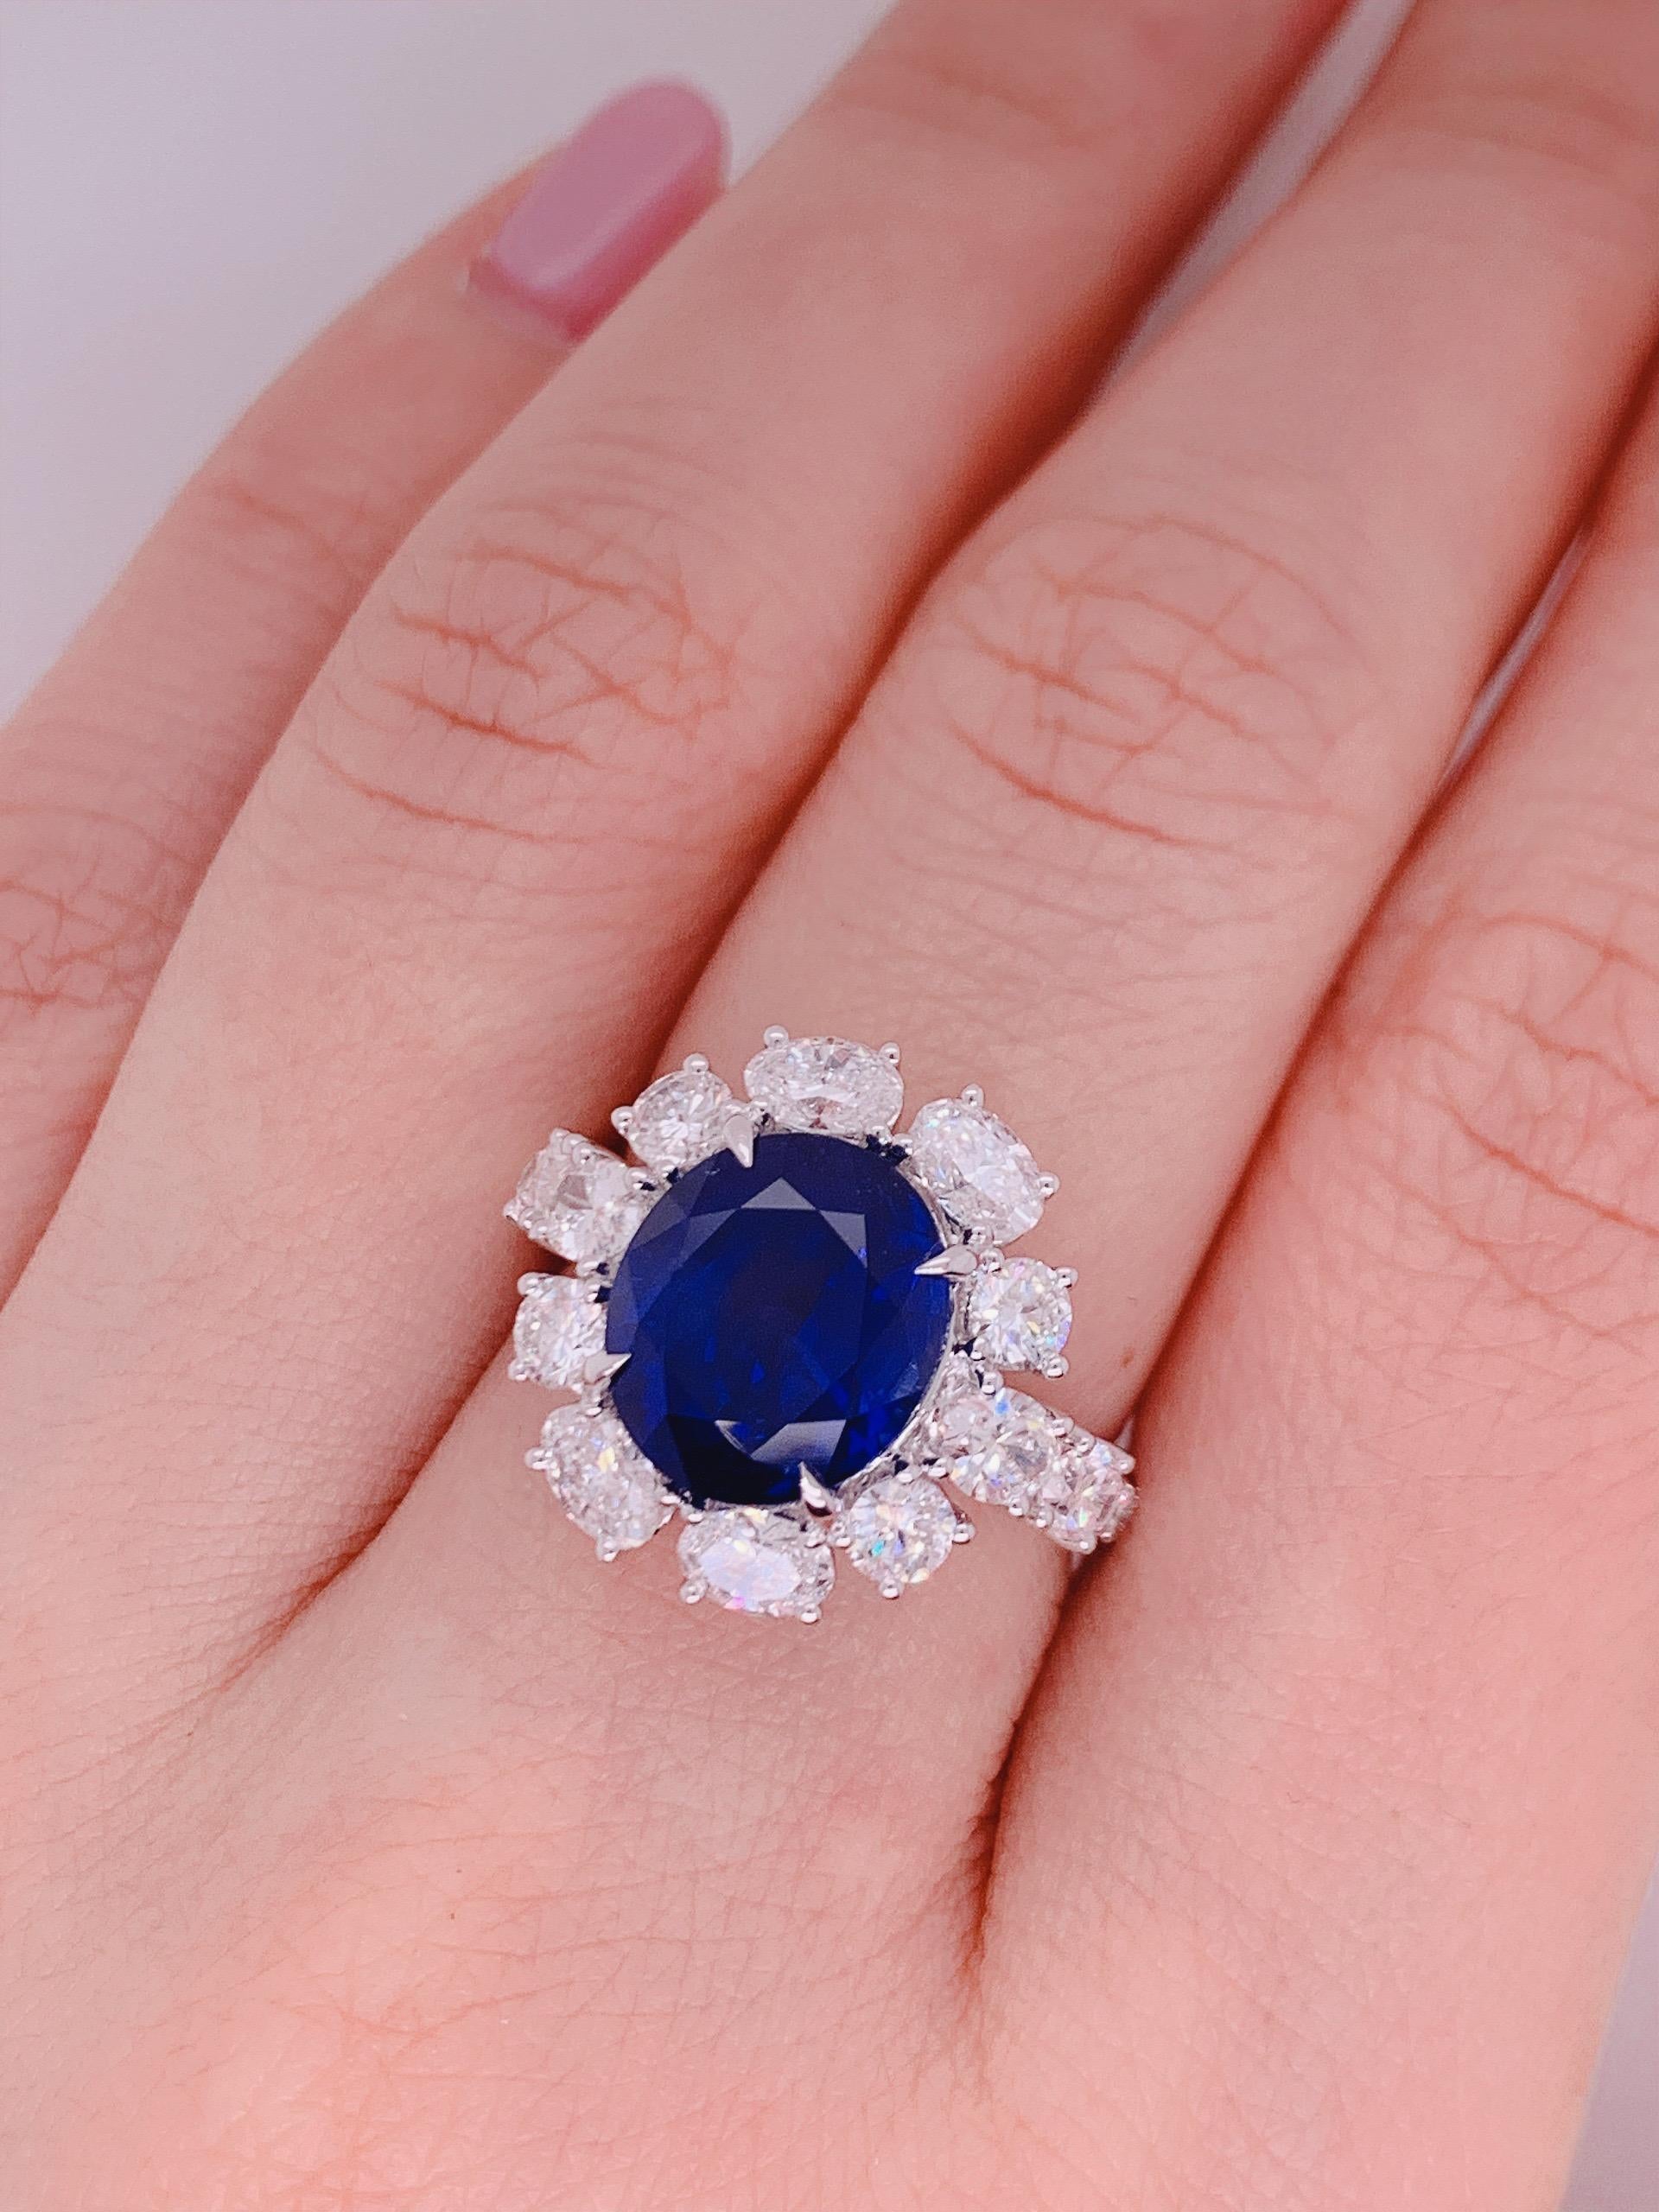 6.22 carat OVAL shape Ceylon Royal blue Sapphire with white diamond finished in white gold. 

With the classic design, oval white diamond around the center stone, simple and elegant .

Center stone certified by world wide known Swiss Laboratory -